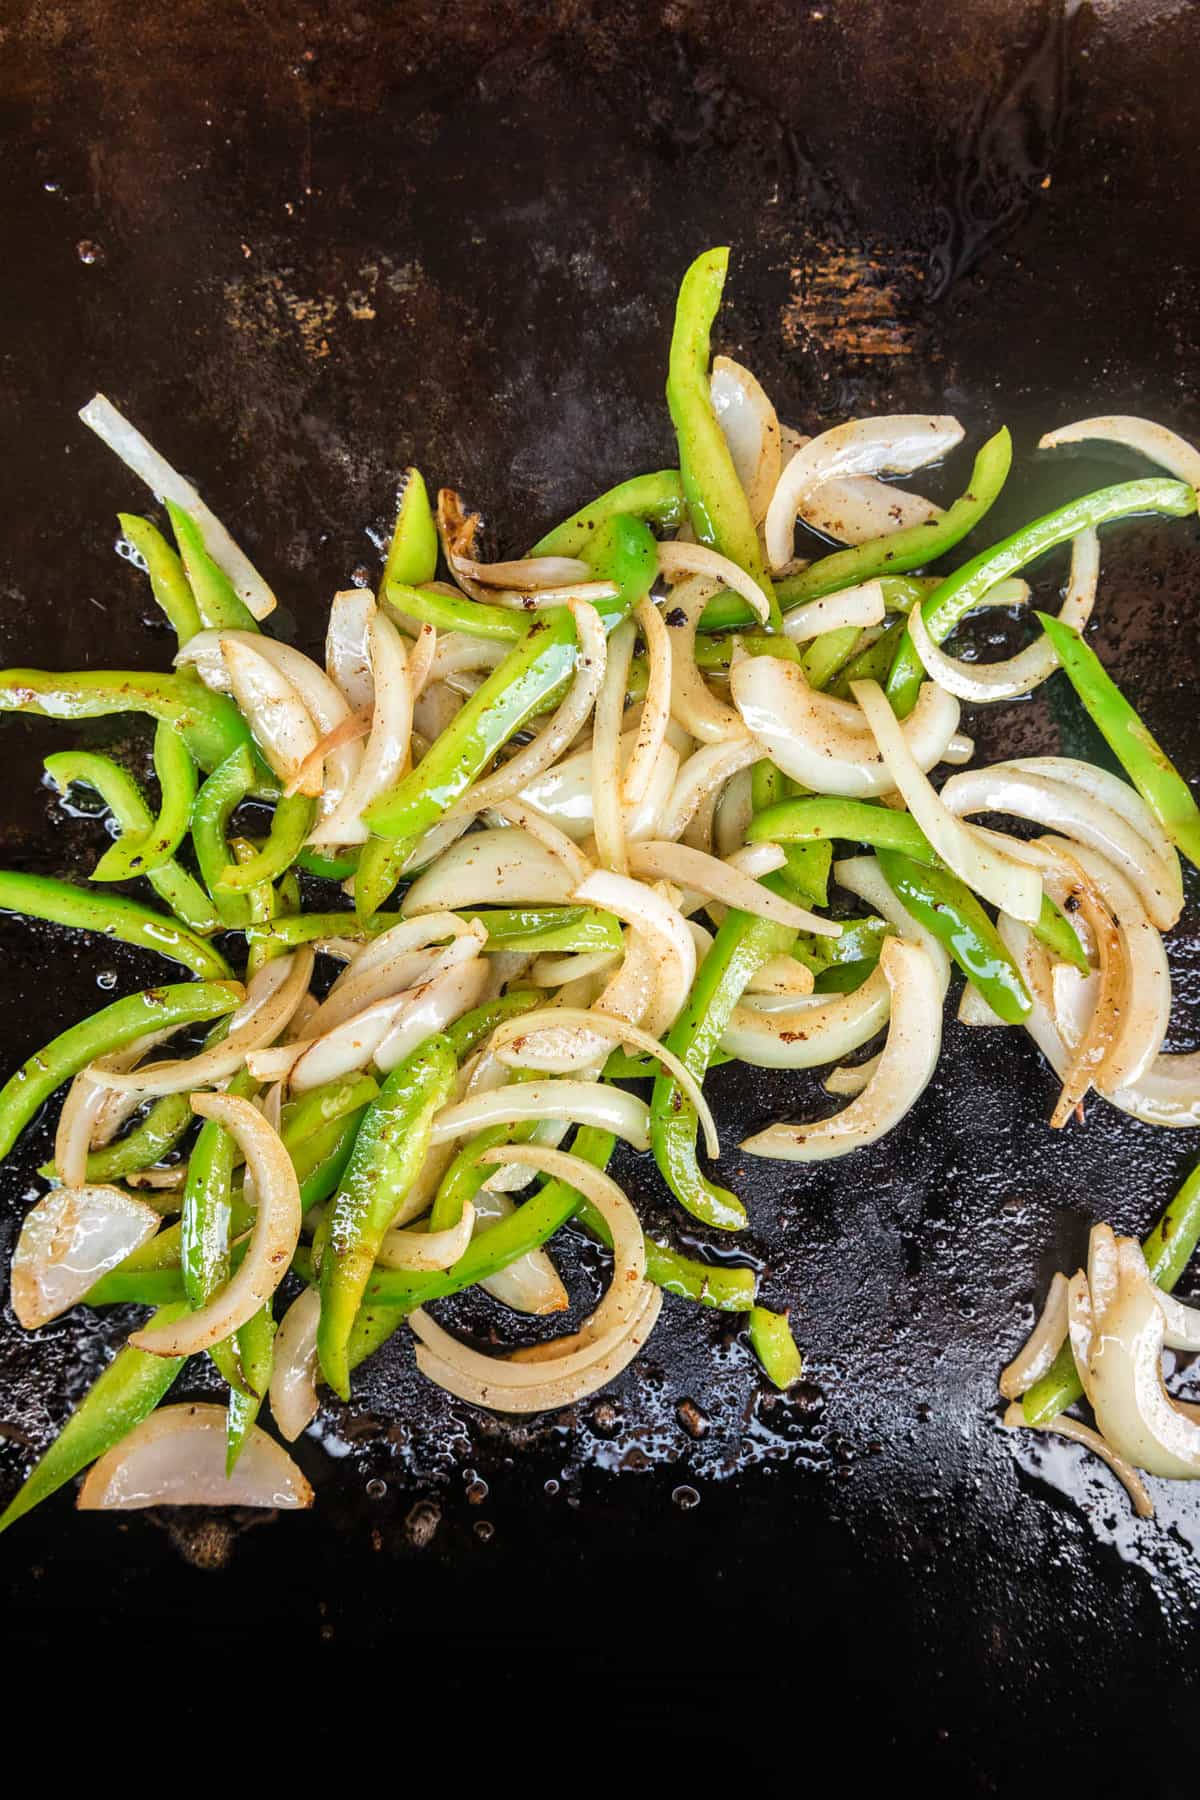 Thinly sliced onion and green pepper sauting on the Blackstone for Philly Cheesesteak on Blackstone